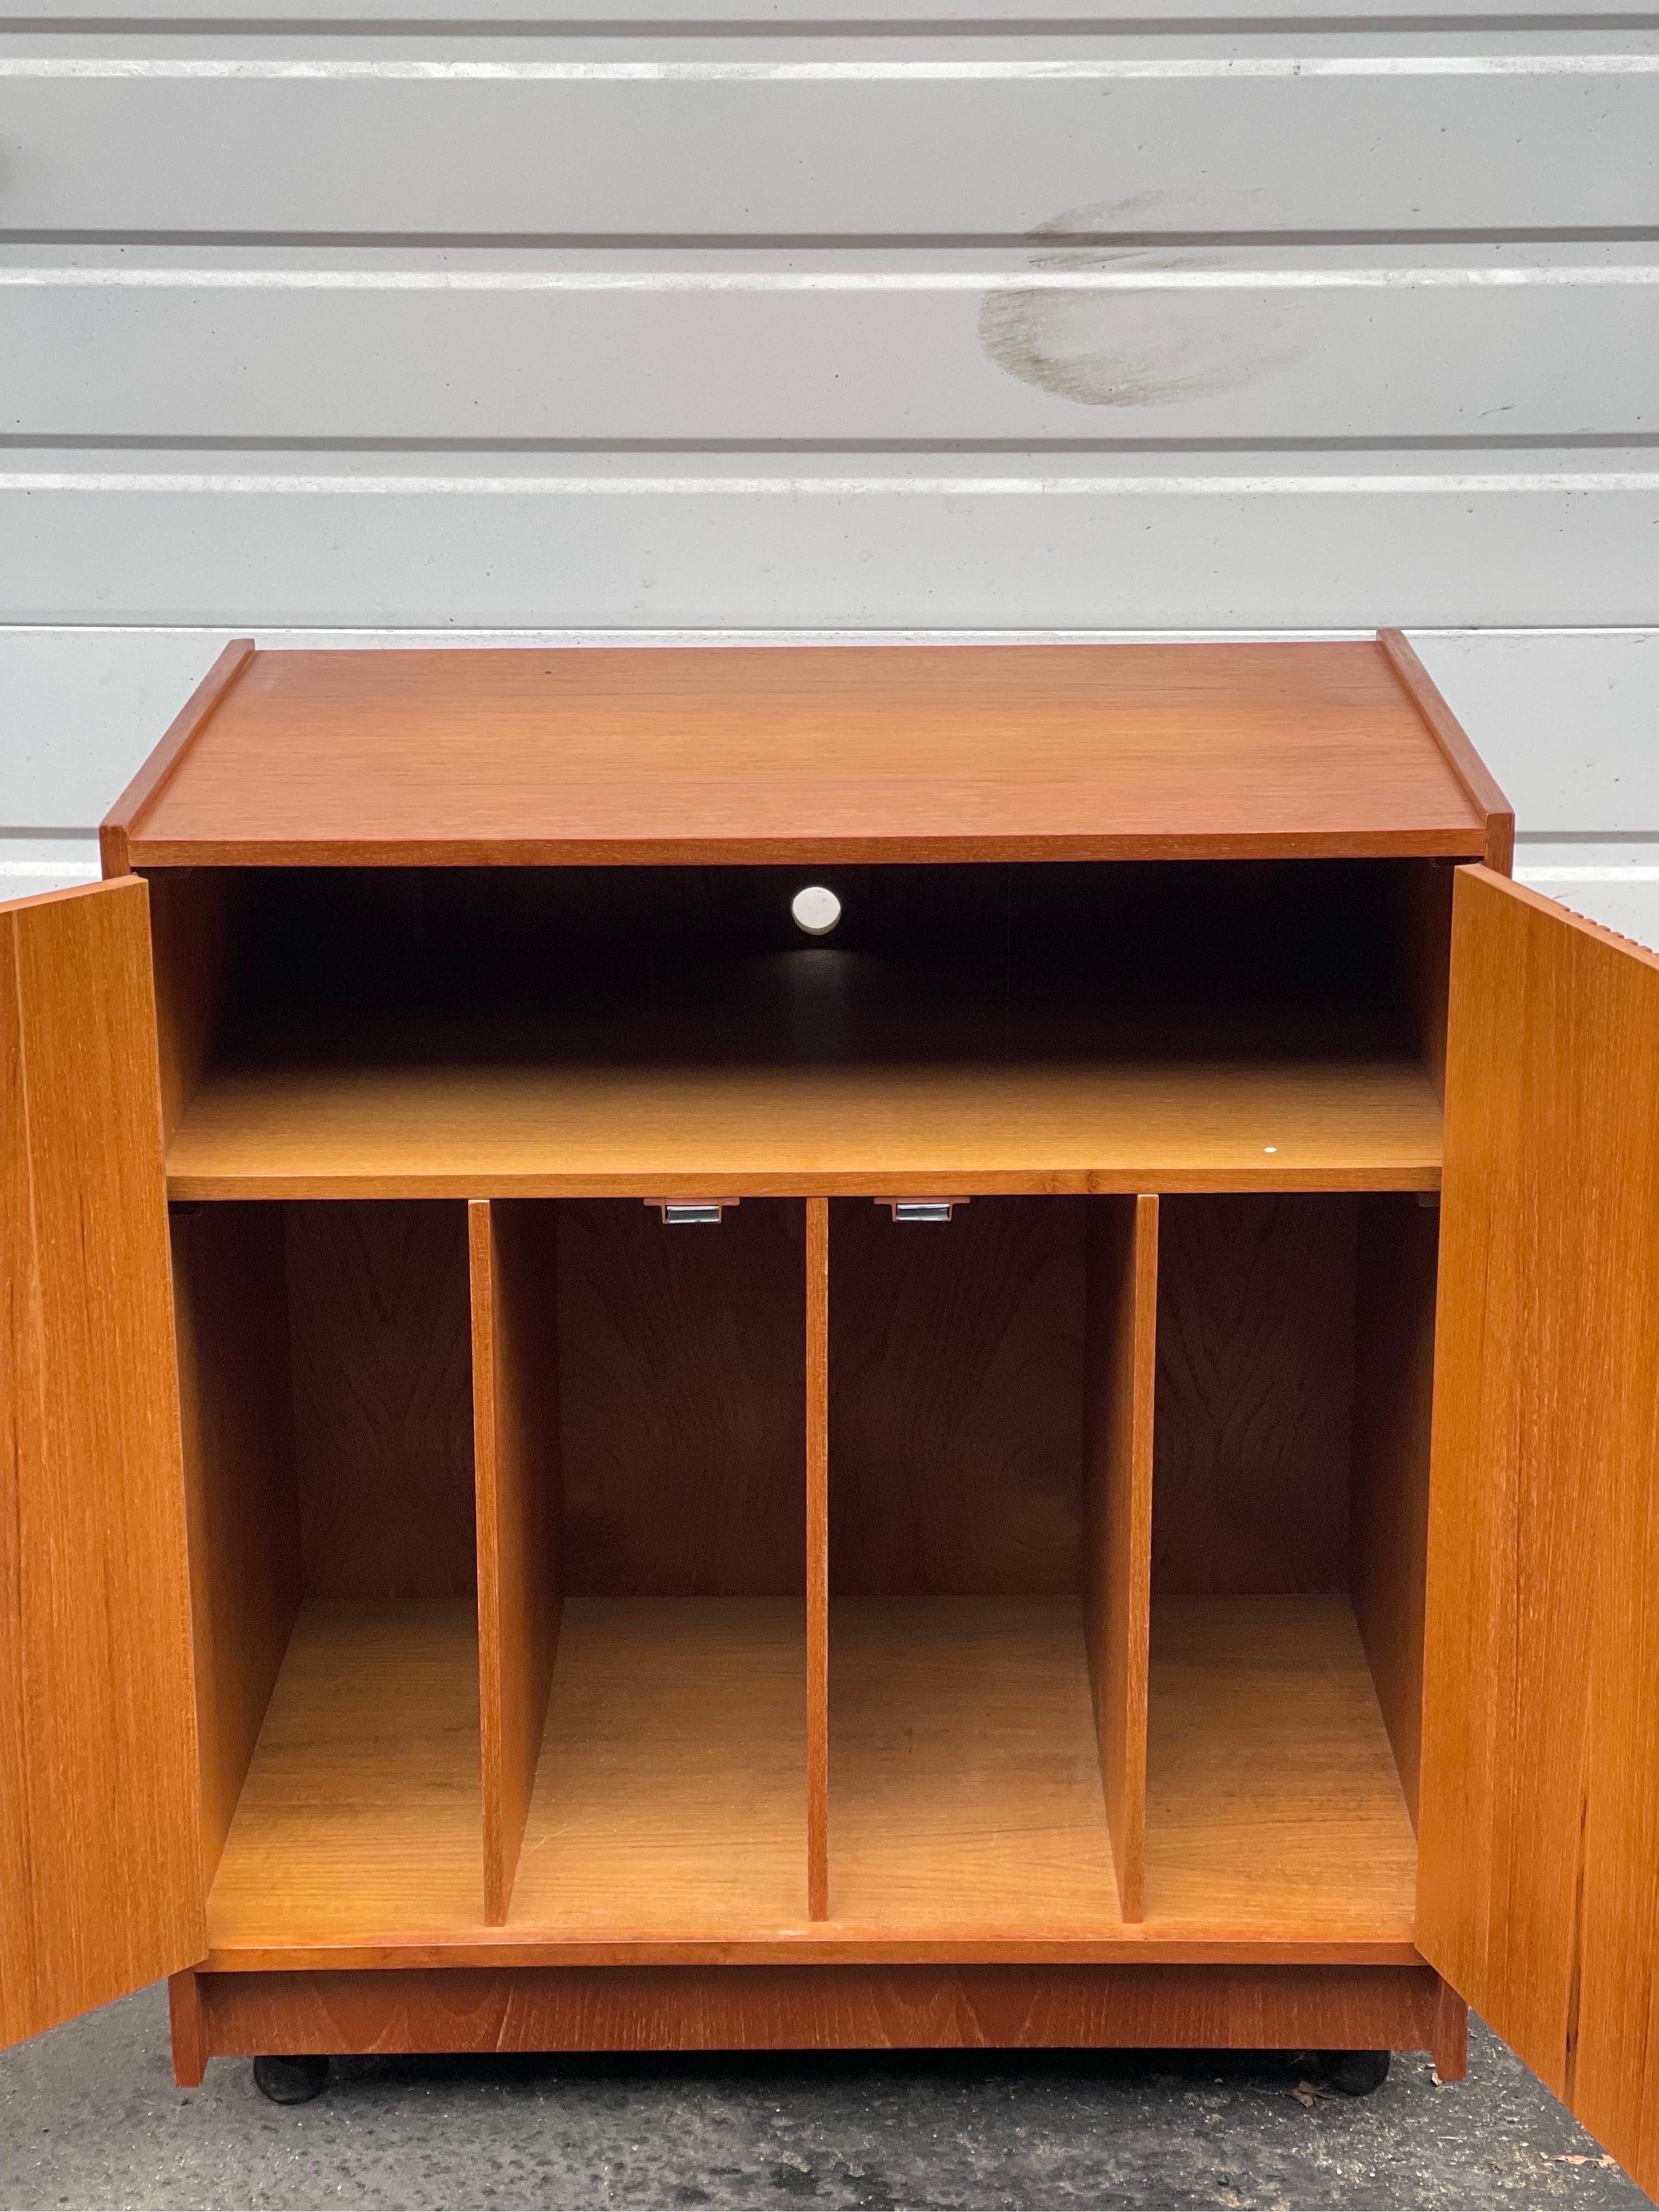 Vintage Mid-Century Modern Record Cabinet with Casters, Uk Import 2